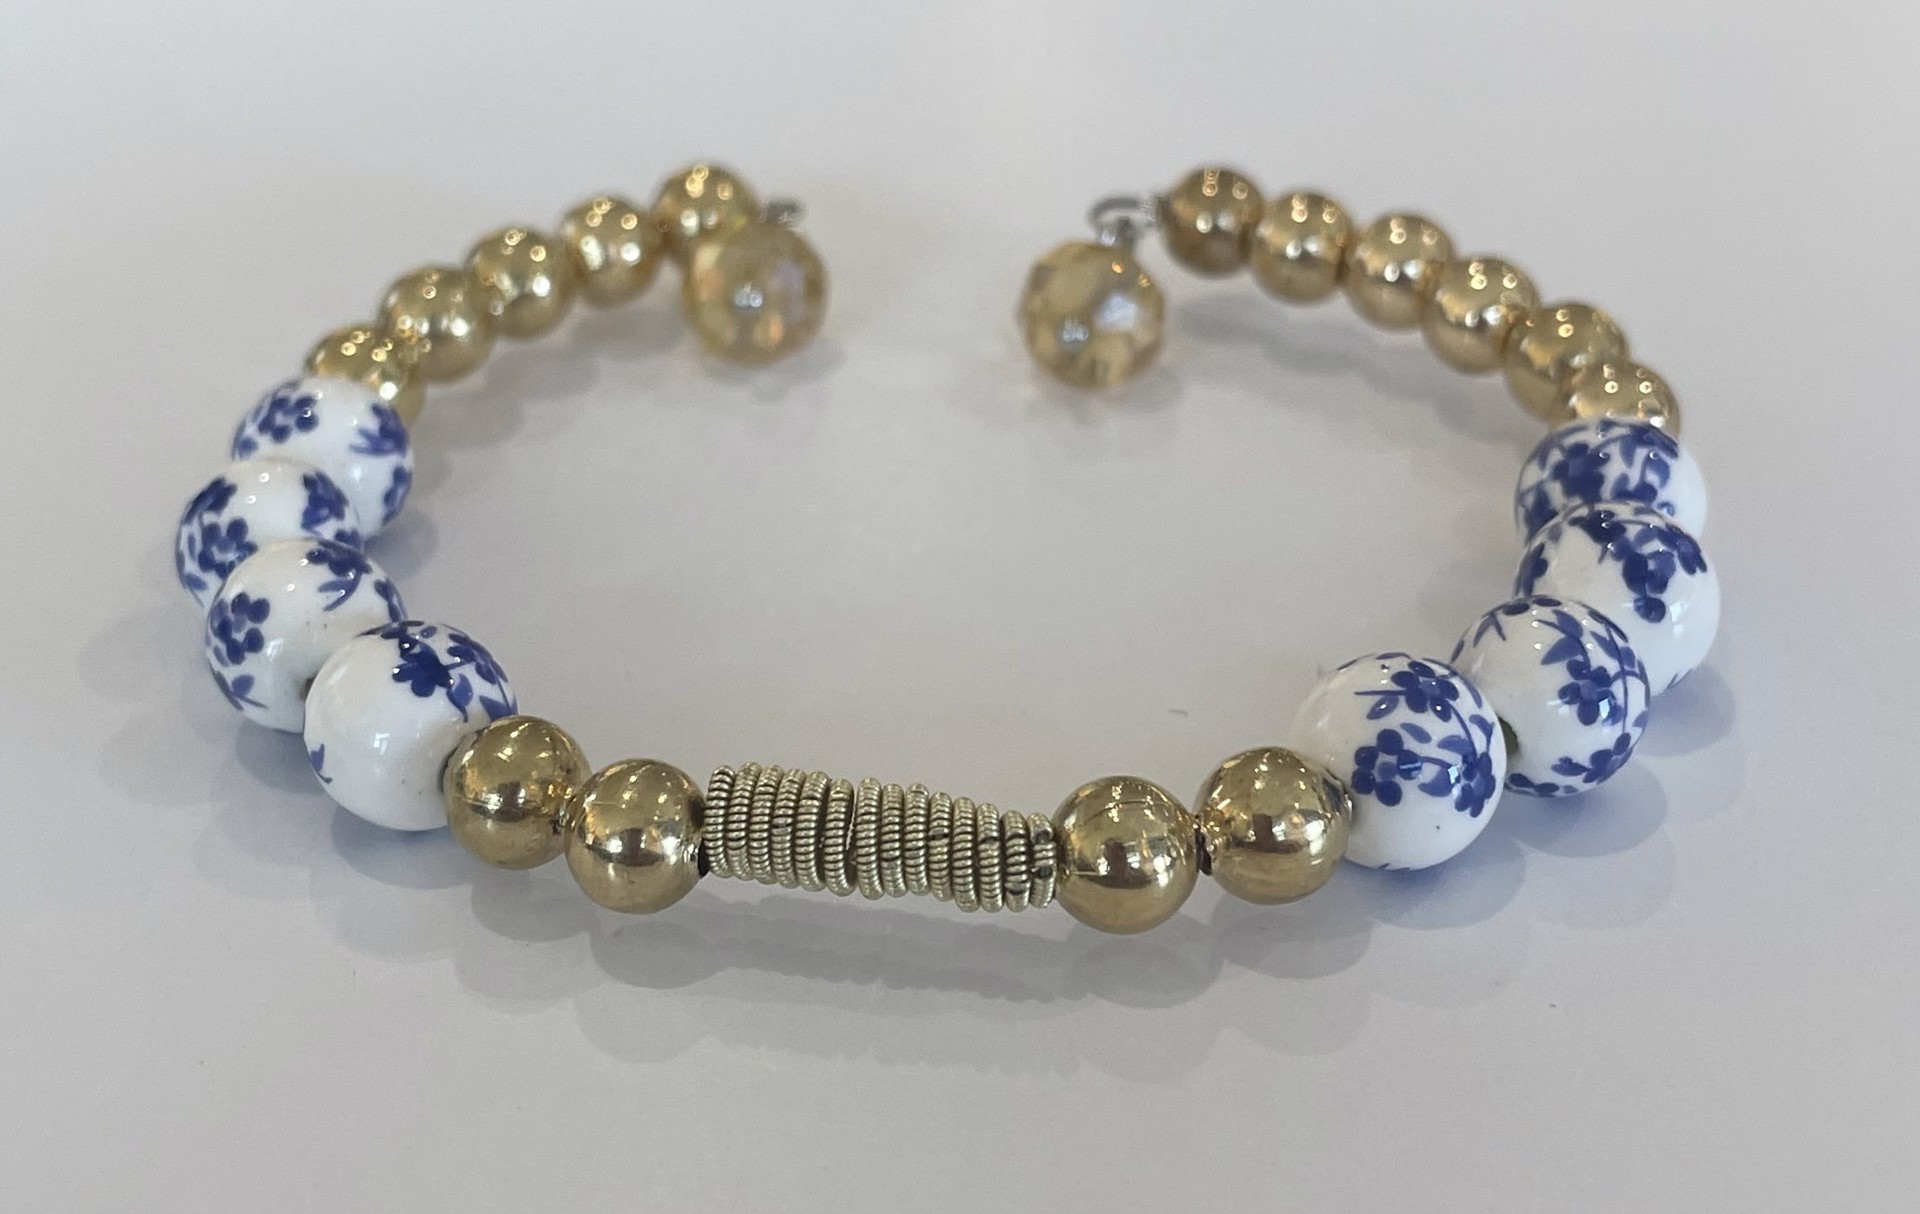 Blue and White Floral with Guitar String Bracelet by String Thing Designs